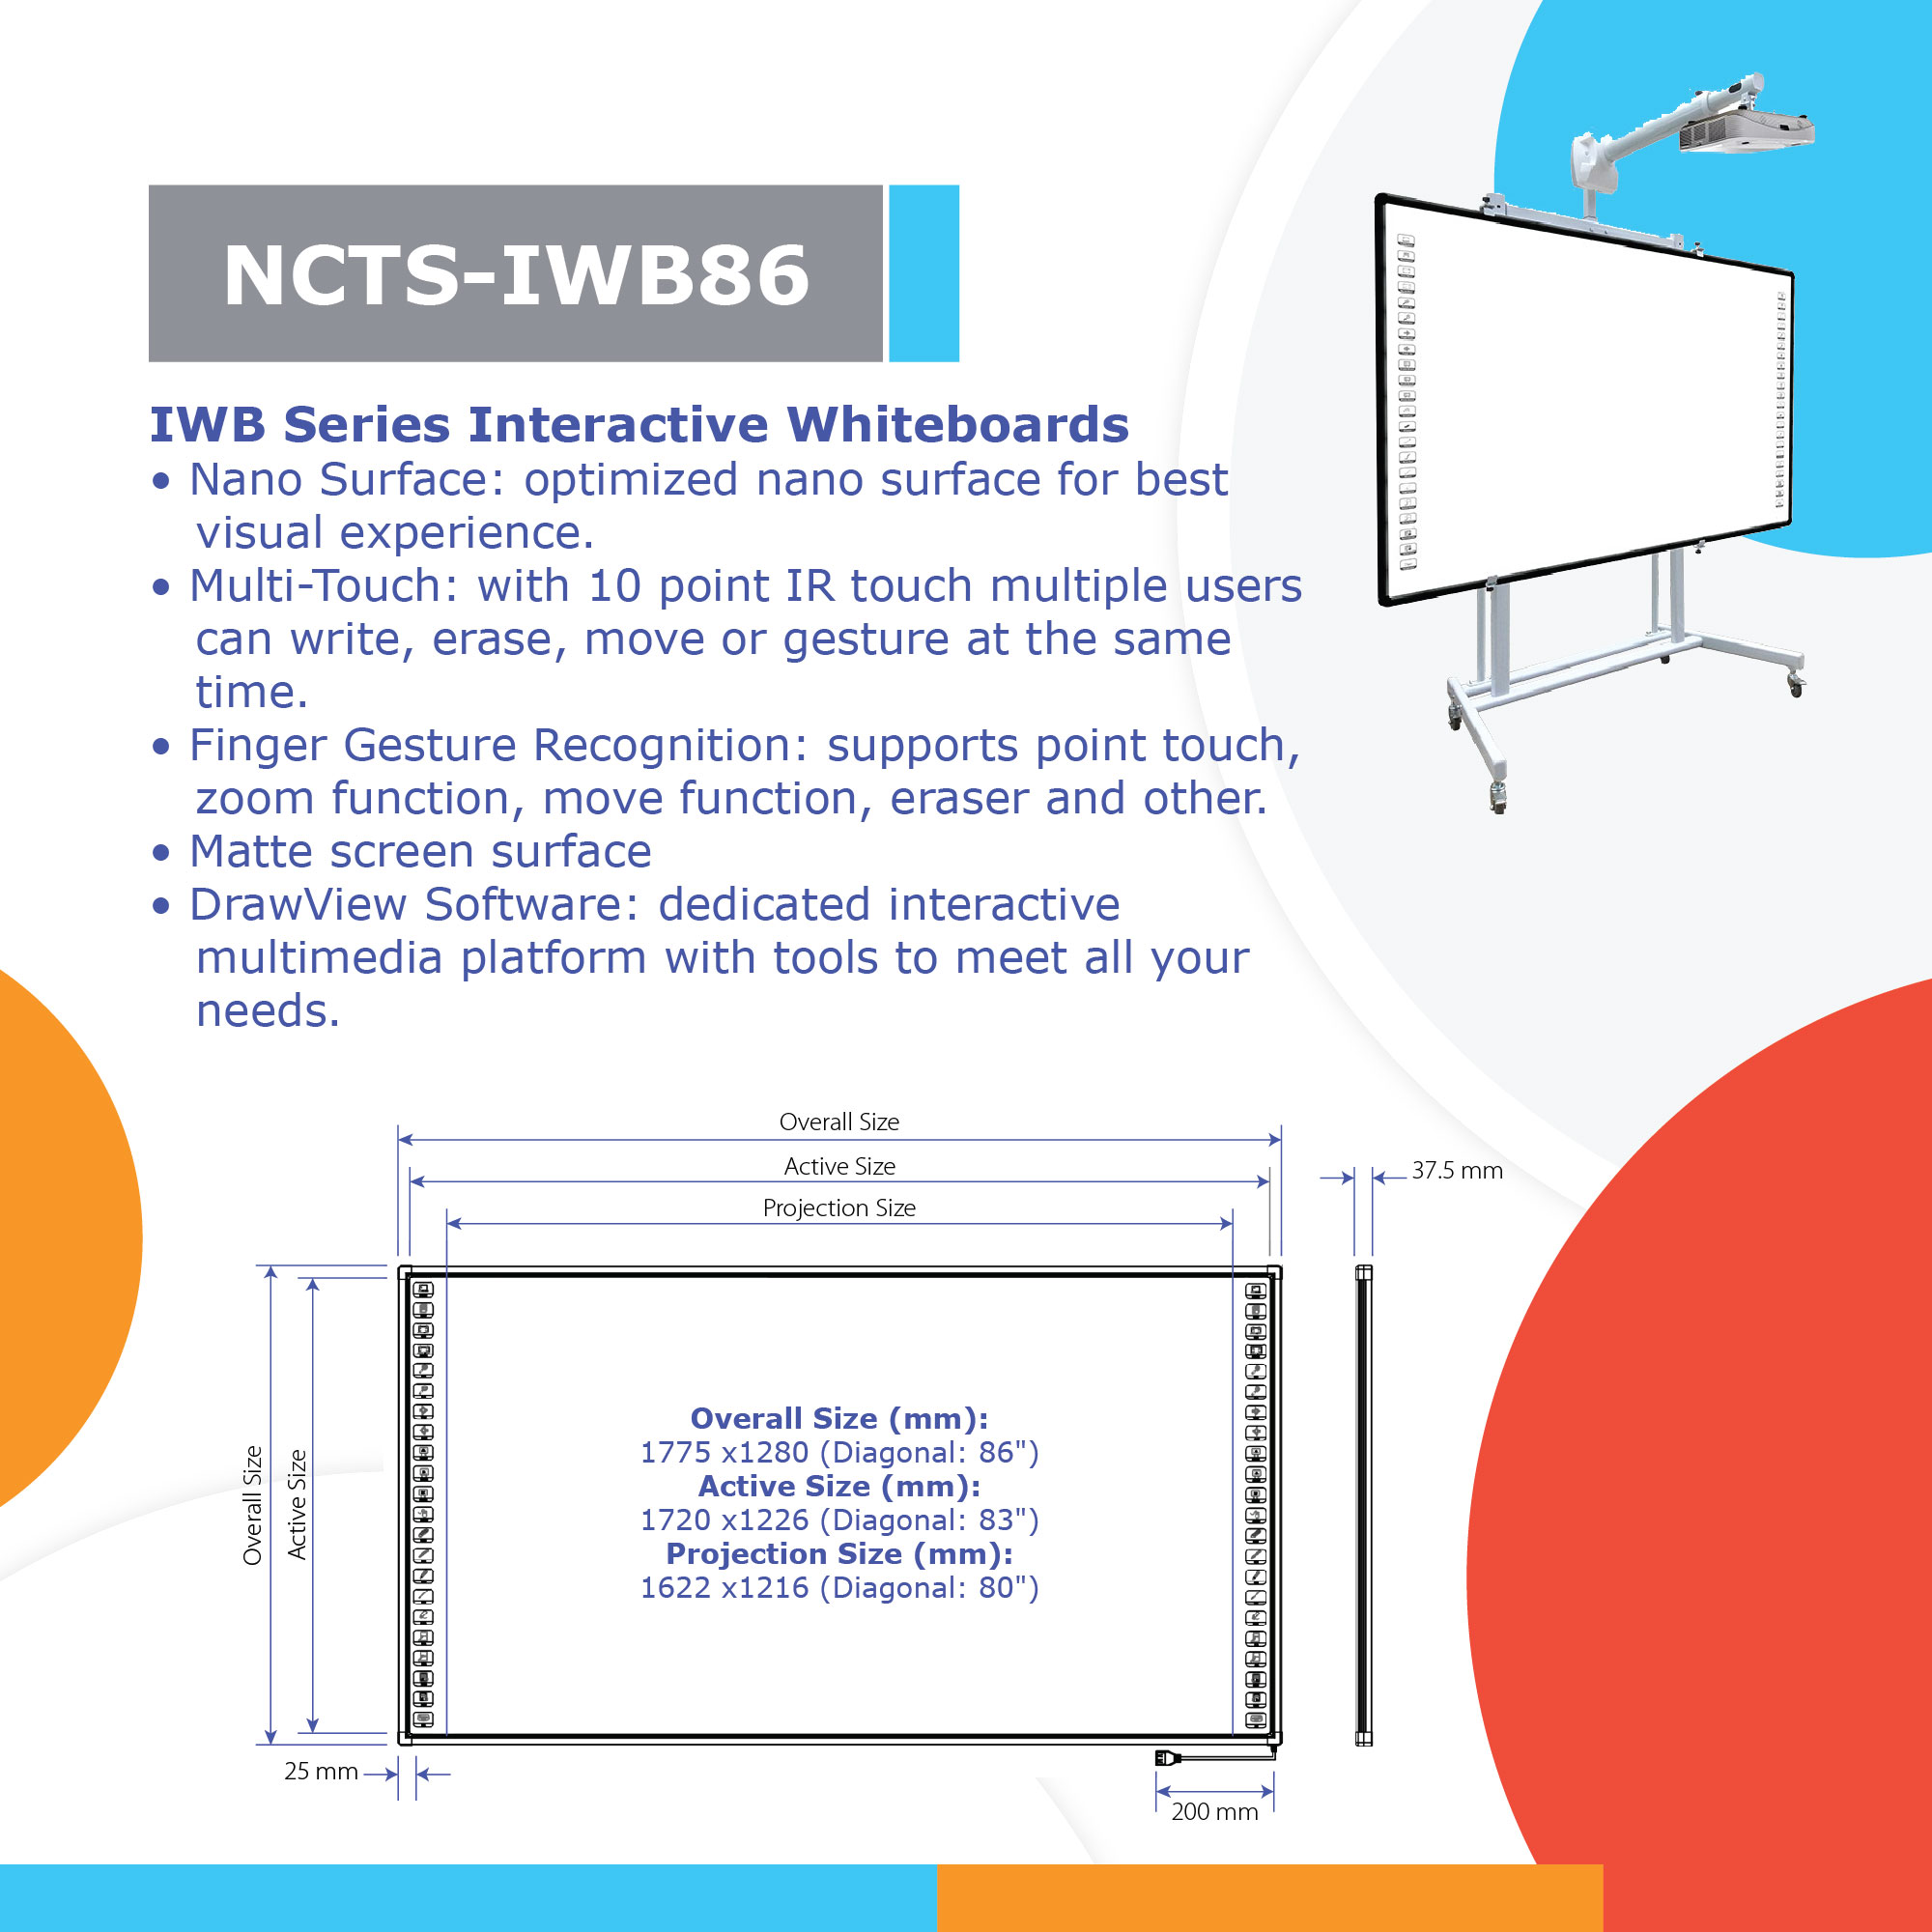 NCTS-IWB86